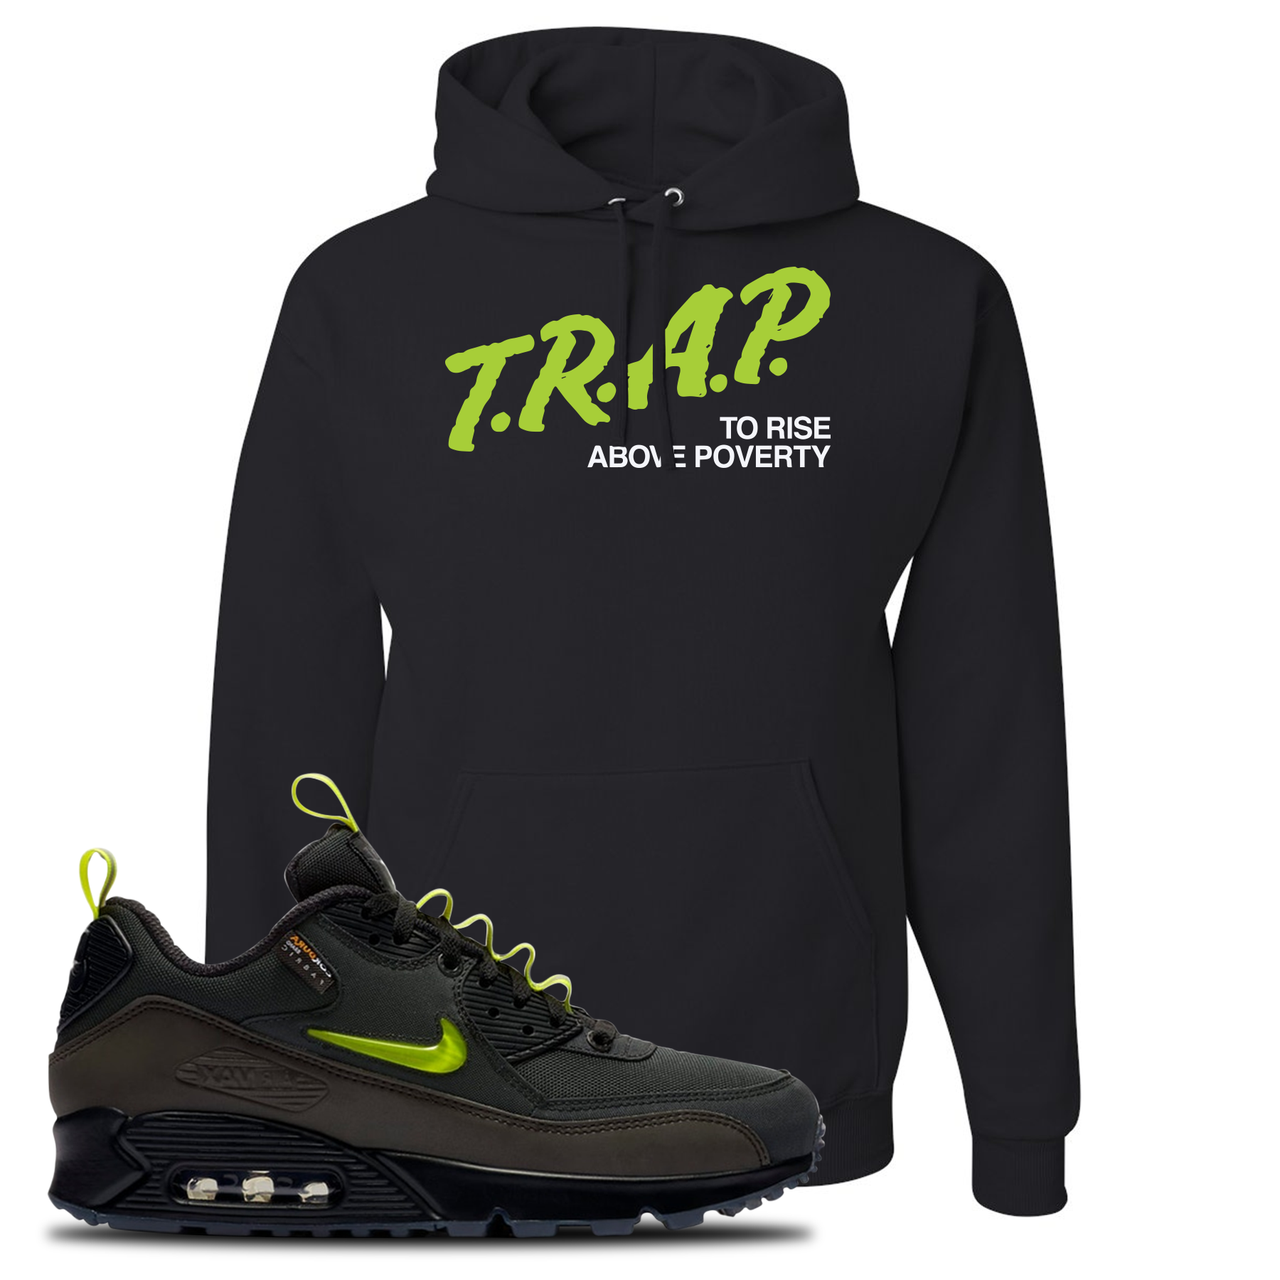 The Basement X Air Max 90 Manchester Trap to Rise Above Poverty Black Sneaker Hook Up Pullover Hoodie